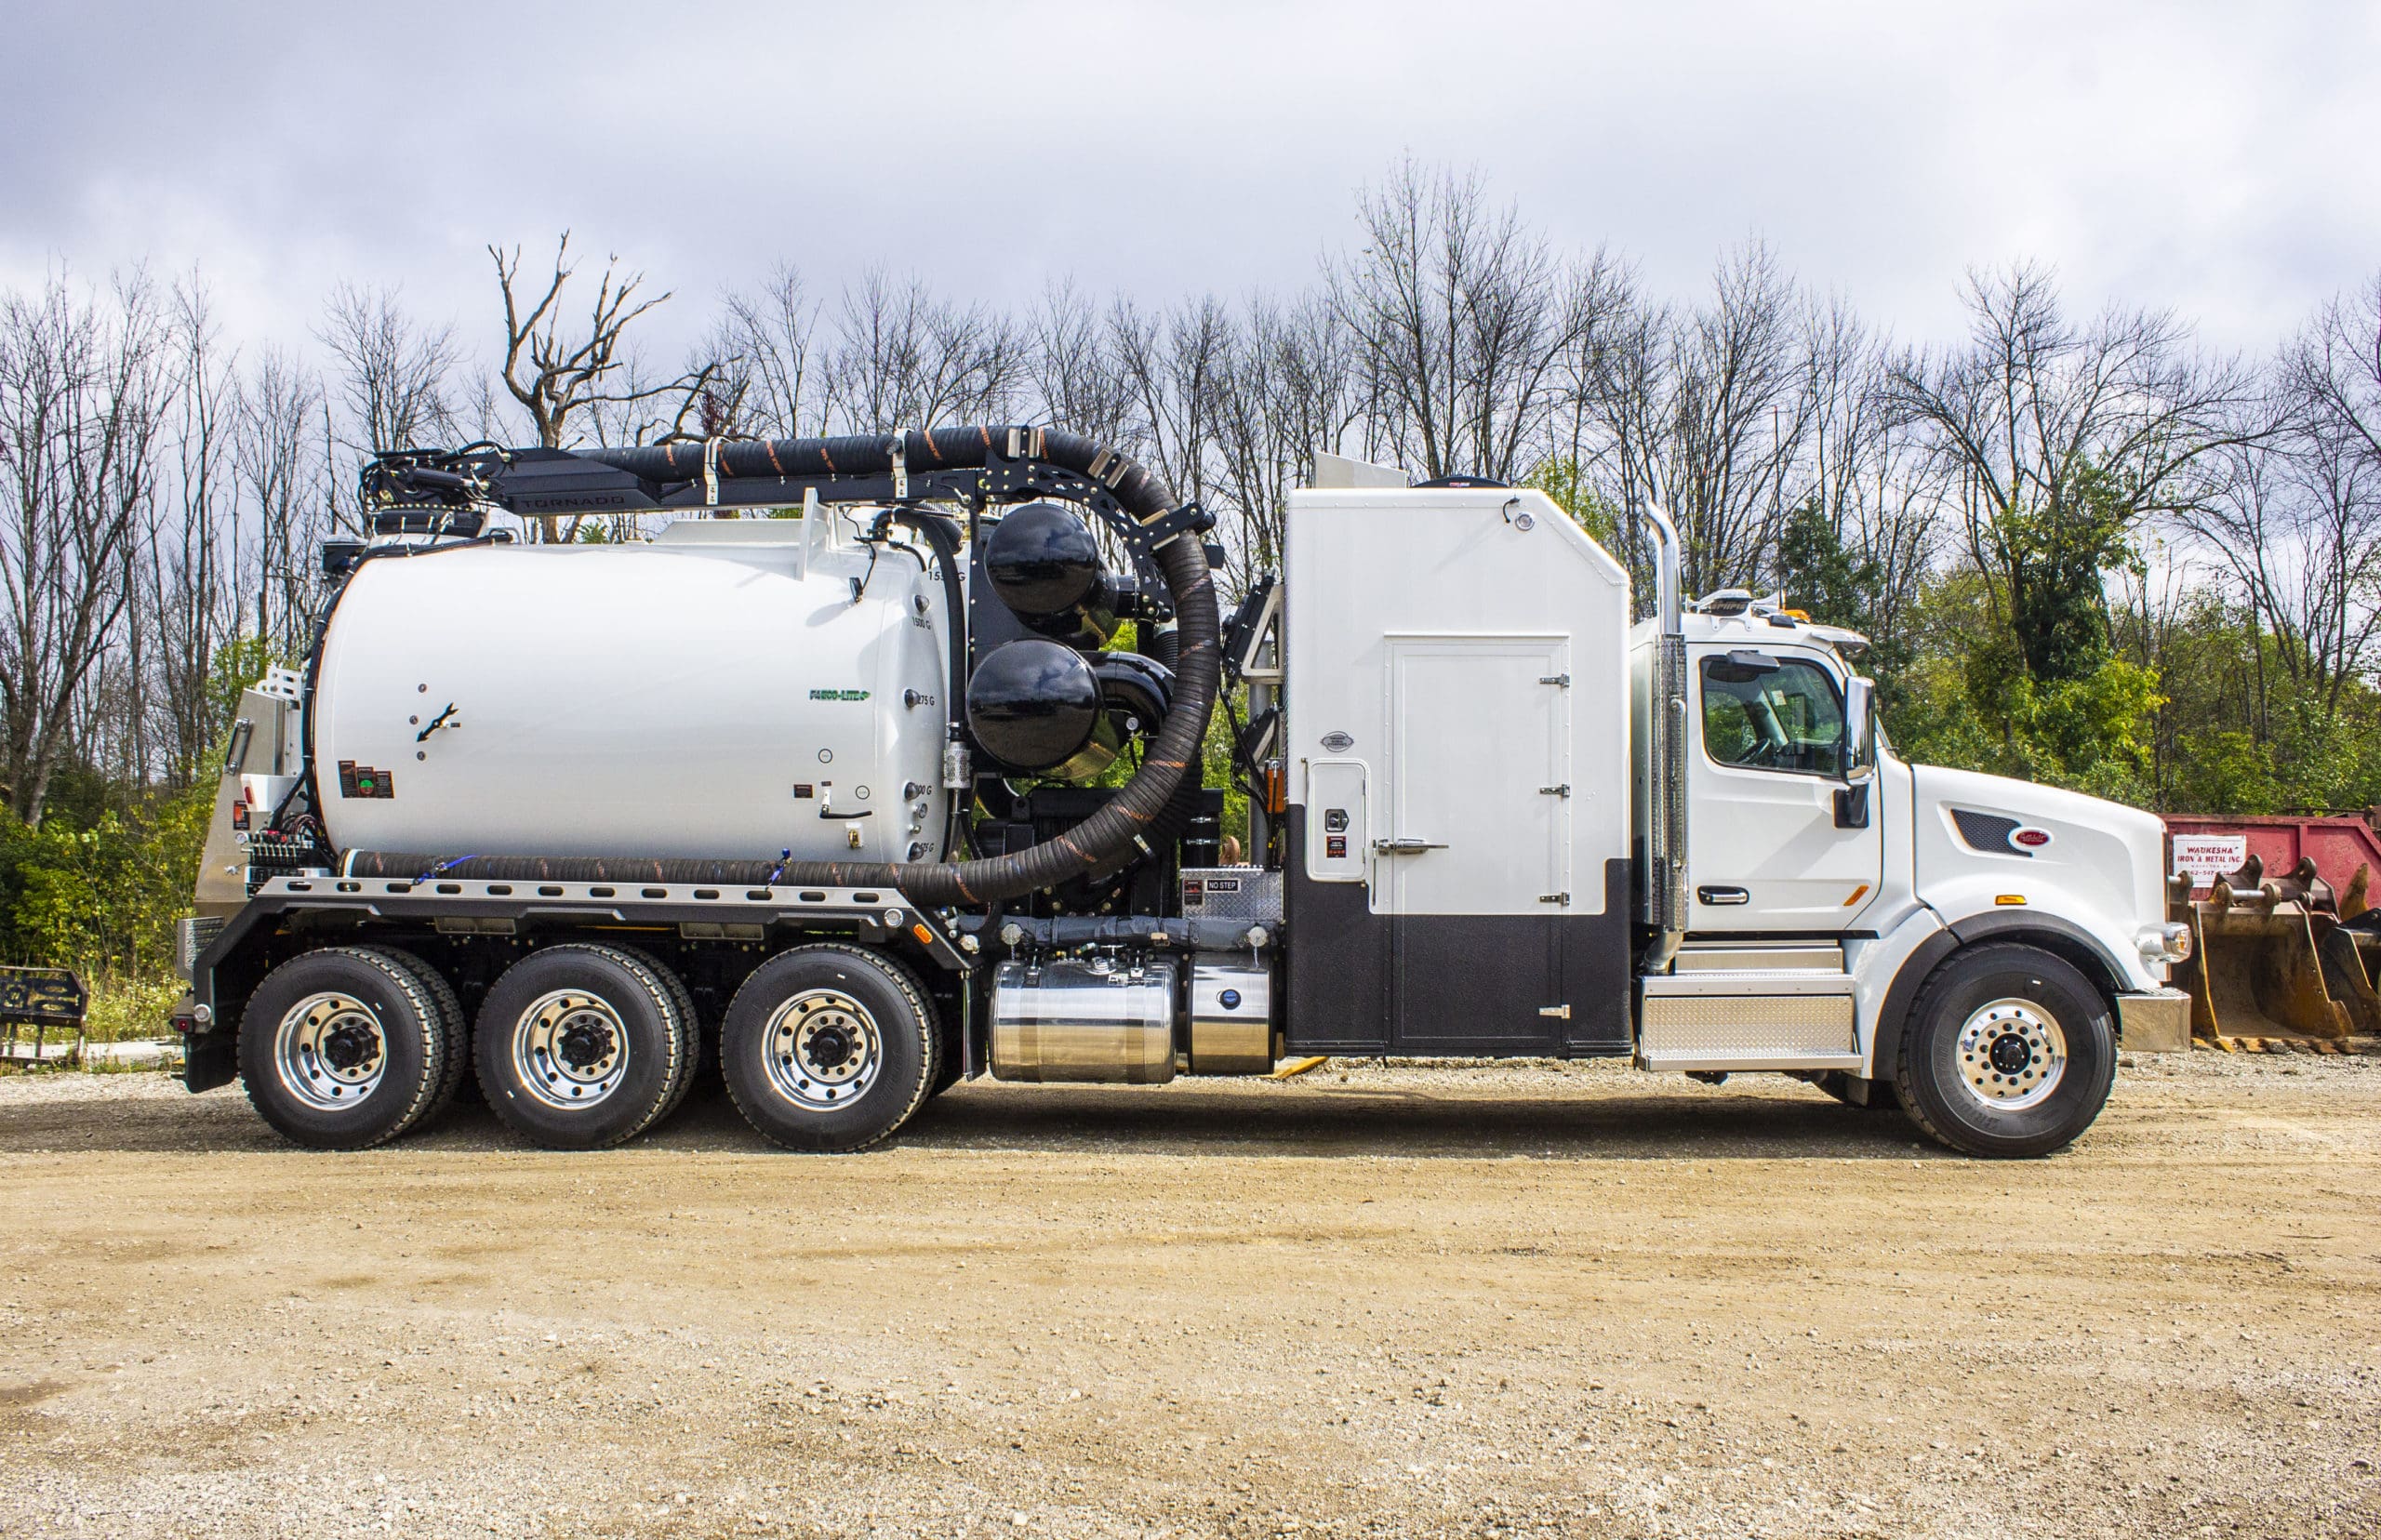 Custom Truck One Source - #ICUEE2019 Preview: #Tornado F4 Eco-Lite  #Hydrovac Truck  Booth: N-3017 This Tornado F4 Eco Lite hydrovac boasts a  tridem axle with a 90″ x 10′ tank and